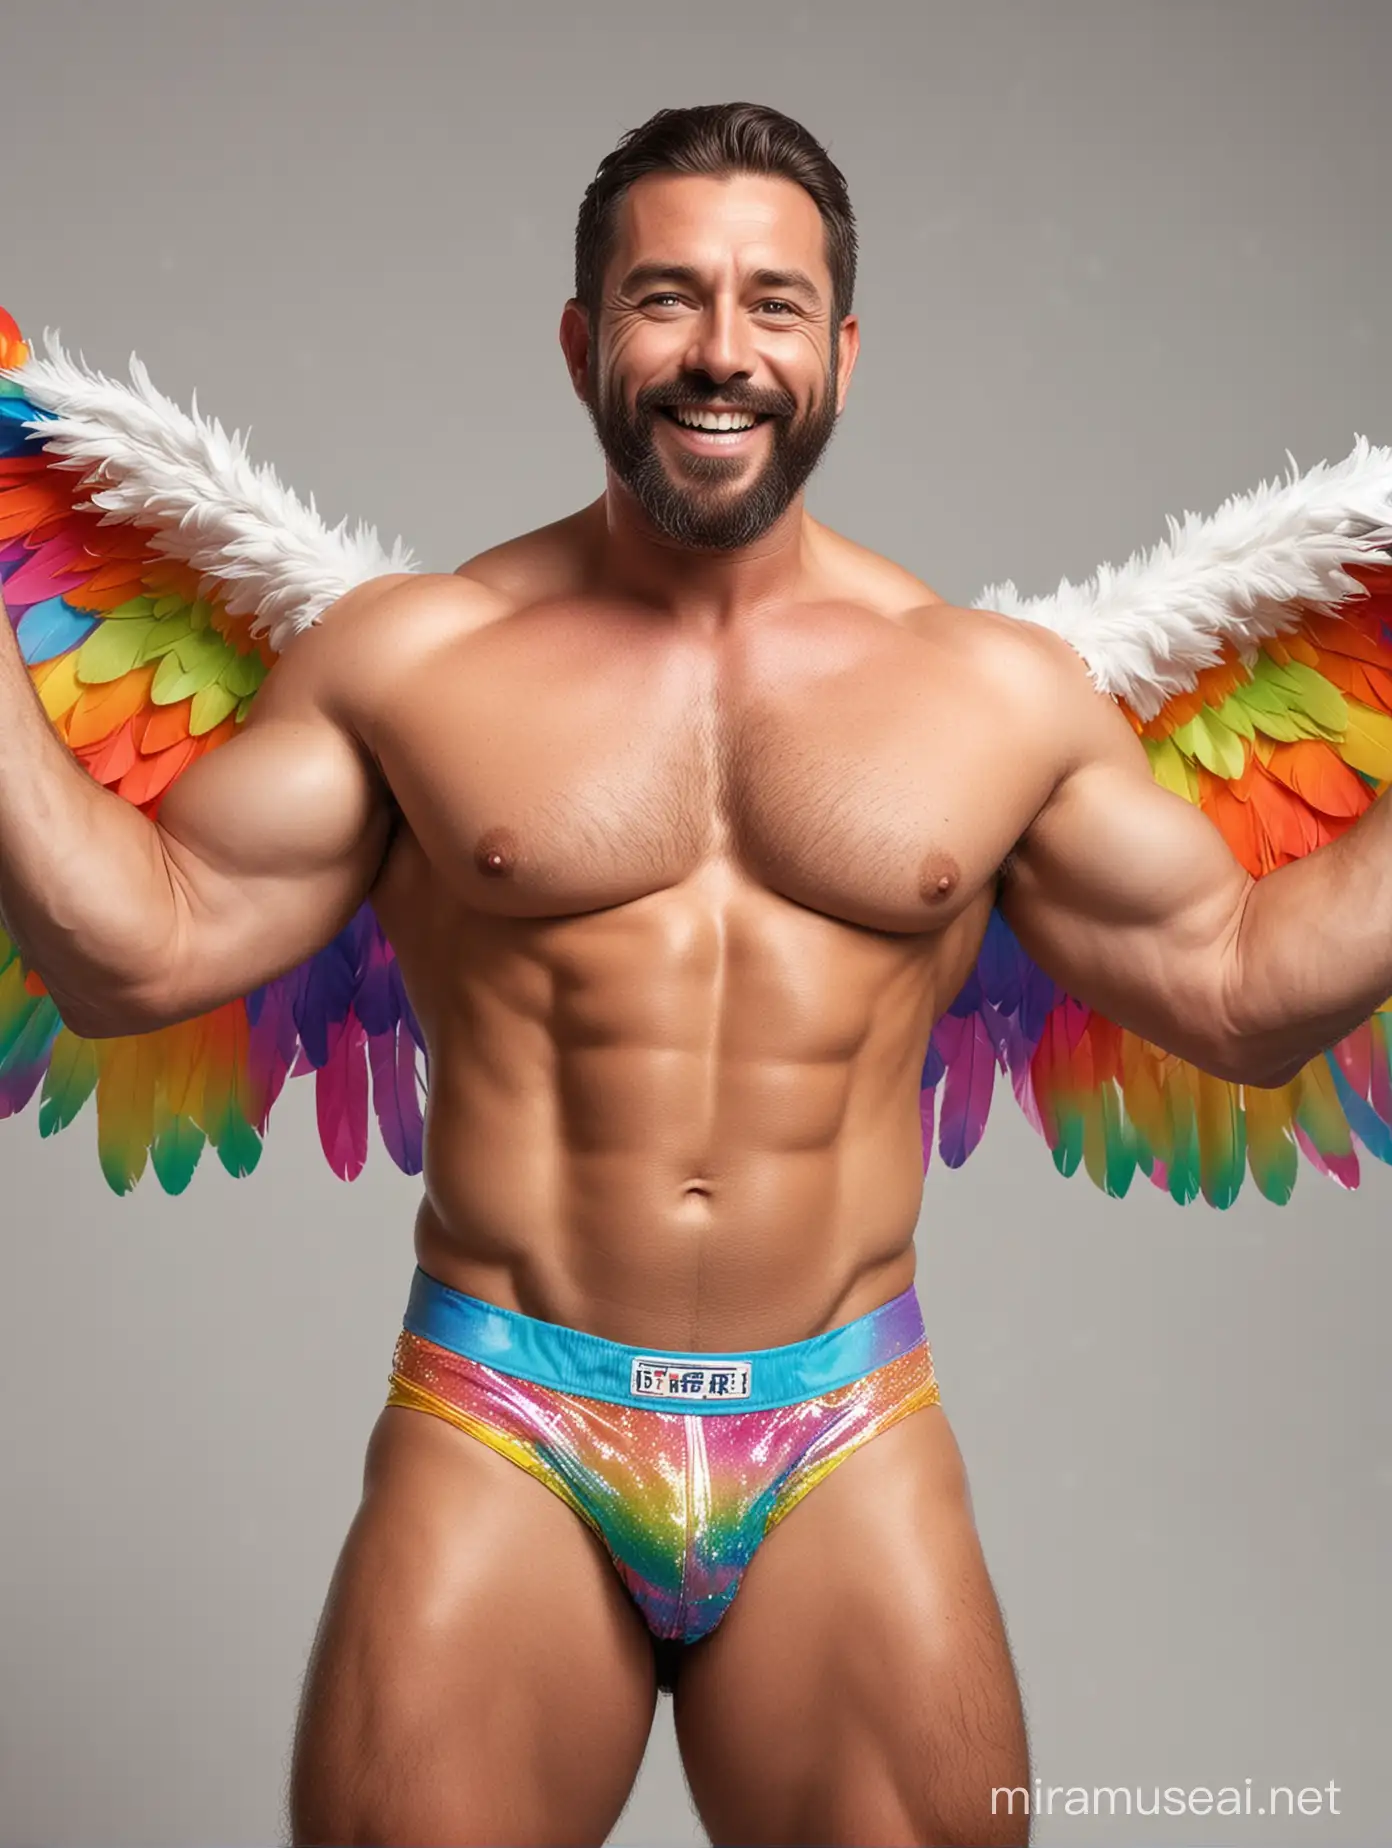 Studio Light Topless Green Eyes 40s Beard Ultra Beefy Bodybuilder Daddy with Great Smile wearing Multi-Highlighter Bright Rainbow Colored See Through huge Eagle Wings Shoulder Jacket short shorts and Flexing his Big Strong Arm Up with Doraemon